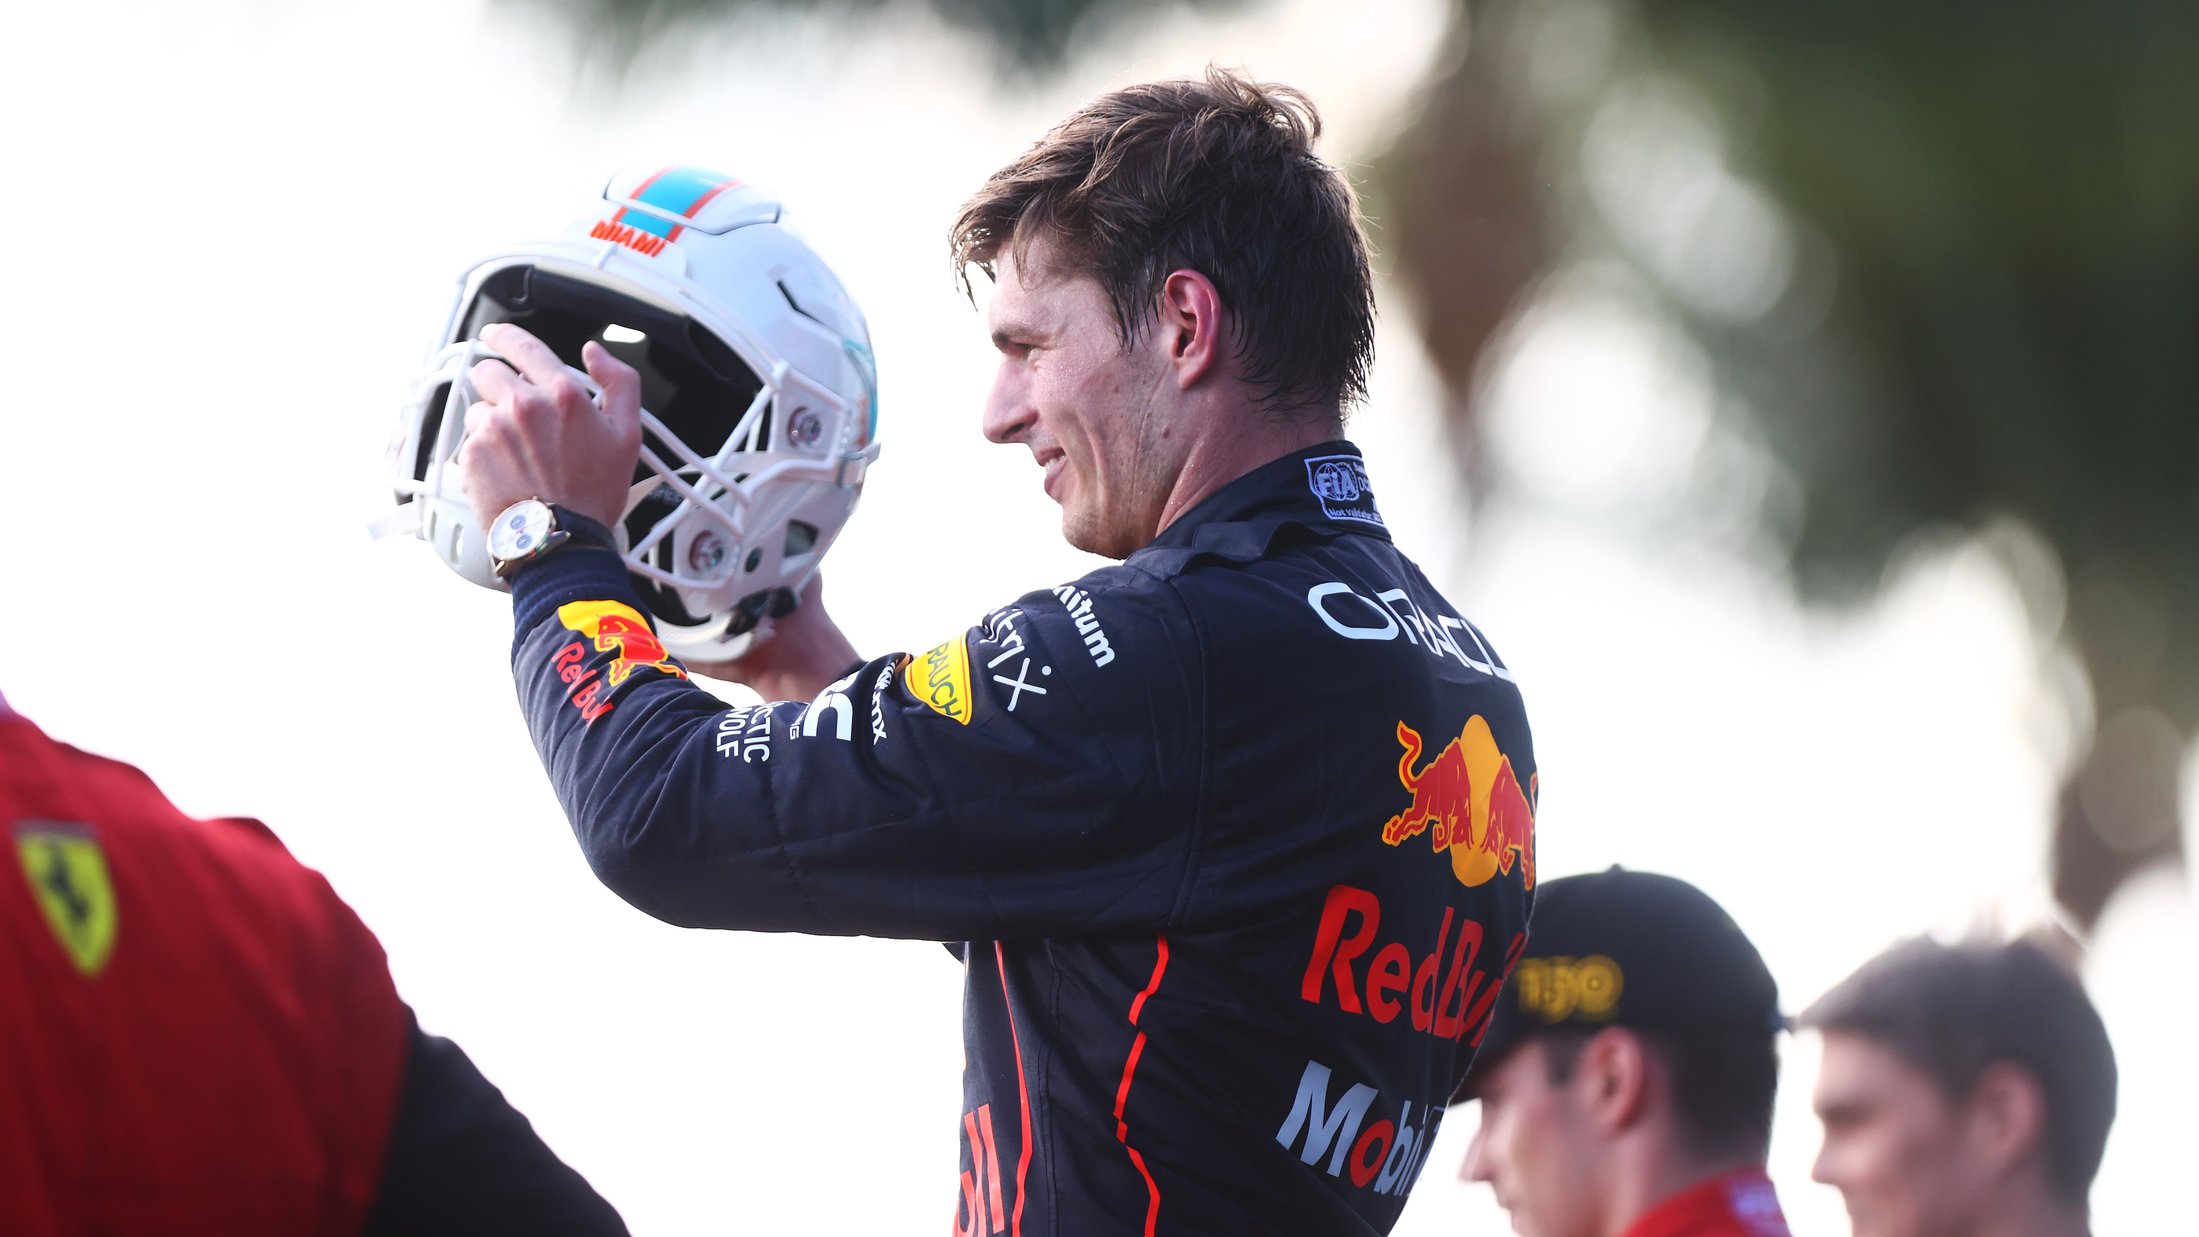 2022 Miami Grand Prix report and highlights: Verstappen wins inaugural Miami Grand Prix over Leclerc after Safety Car belated drama